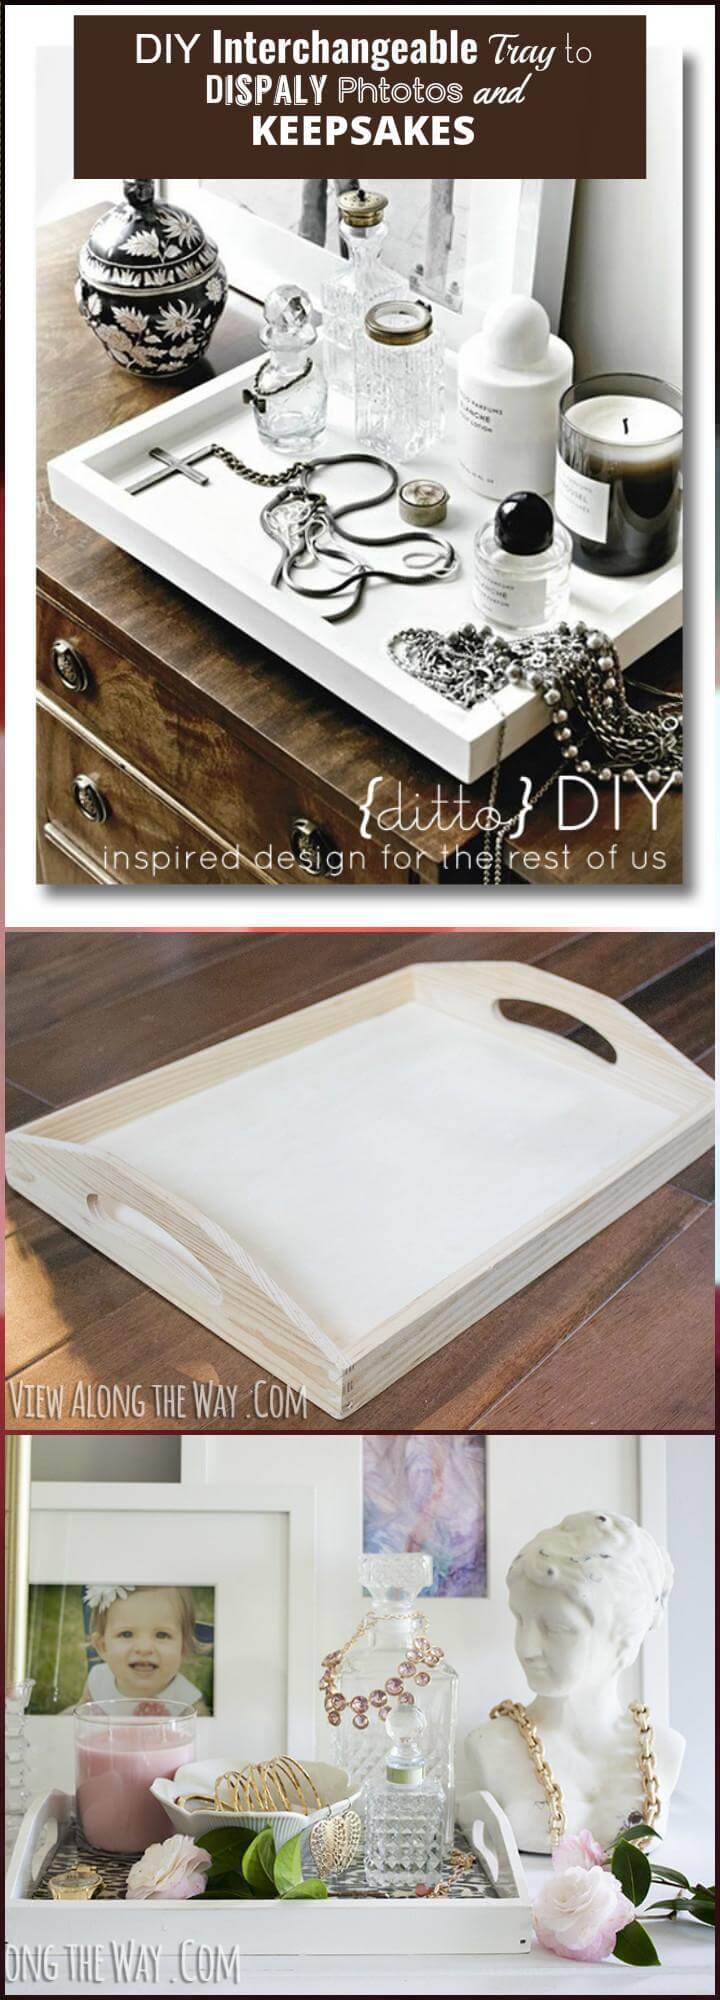 DIY interchangeable try to display photos and keepsakes